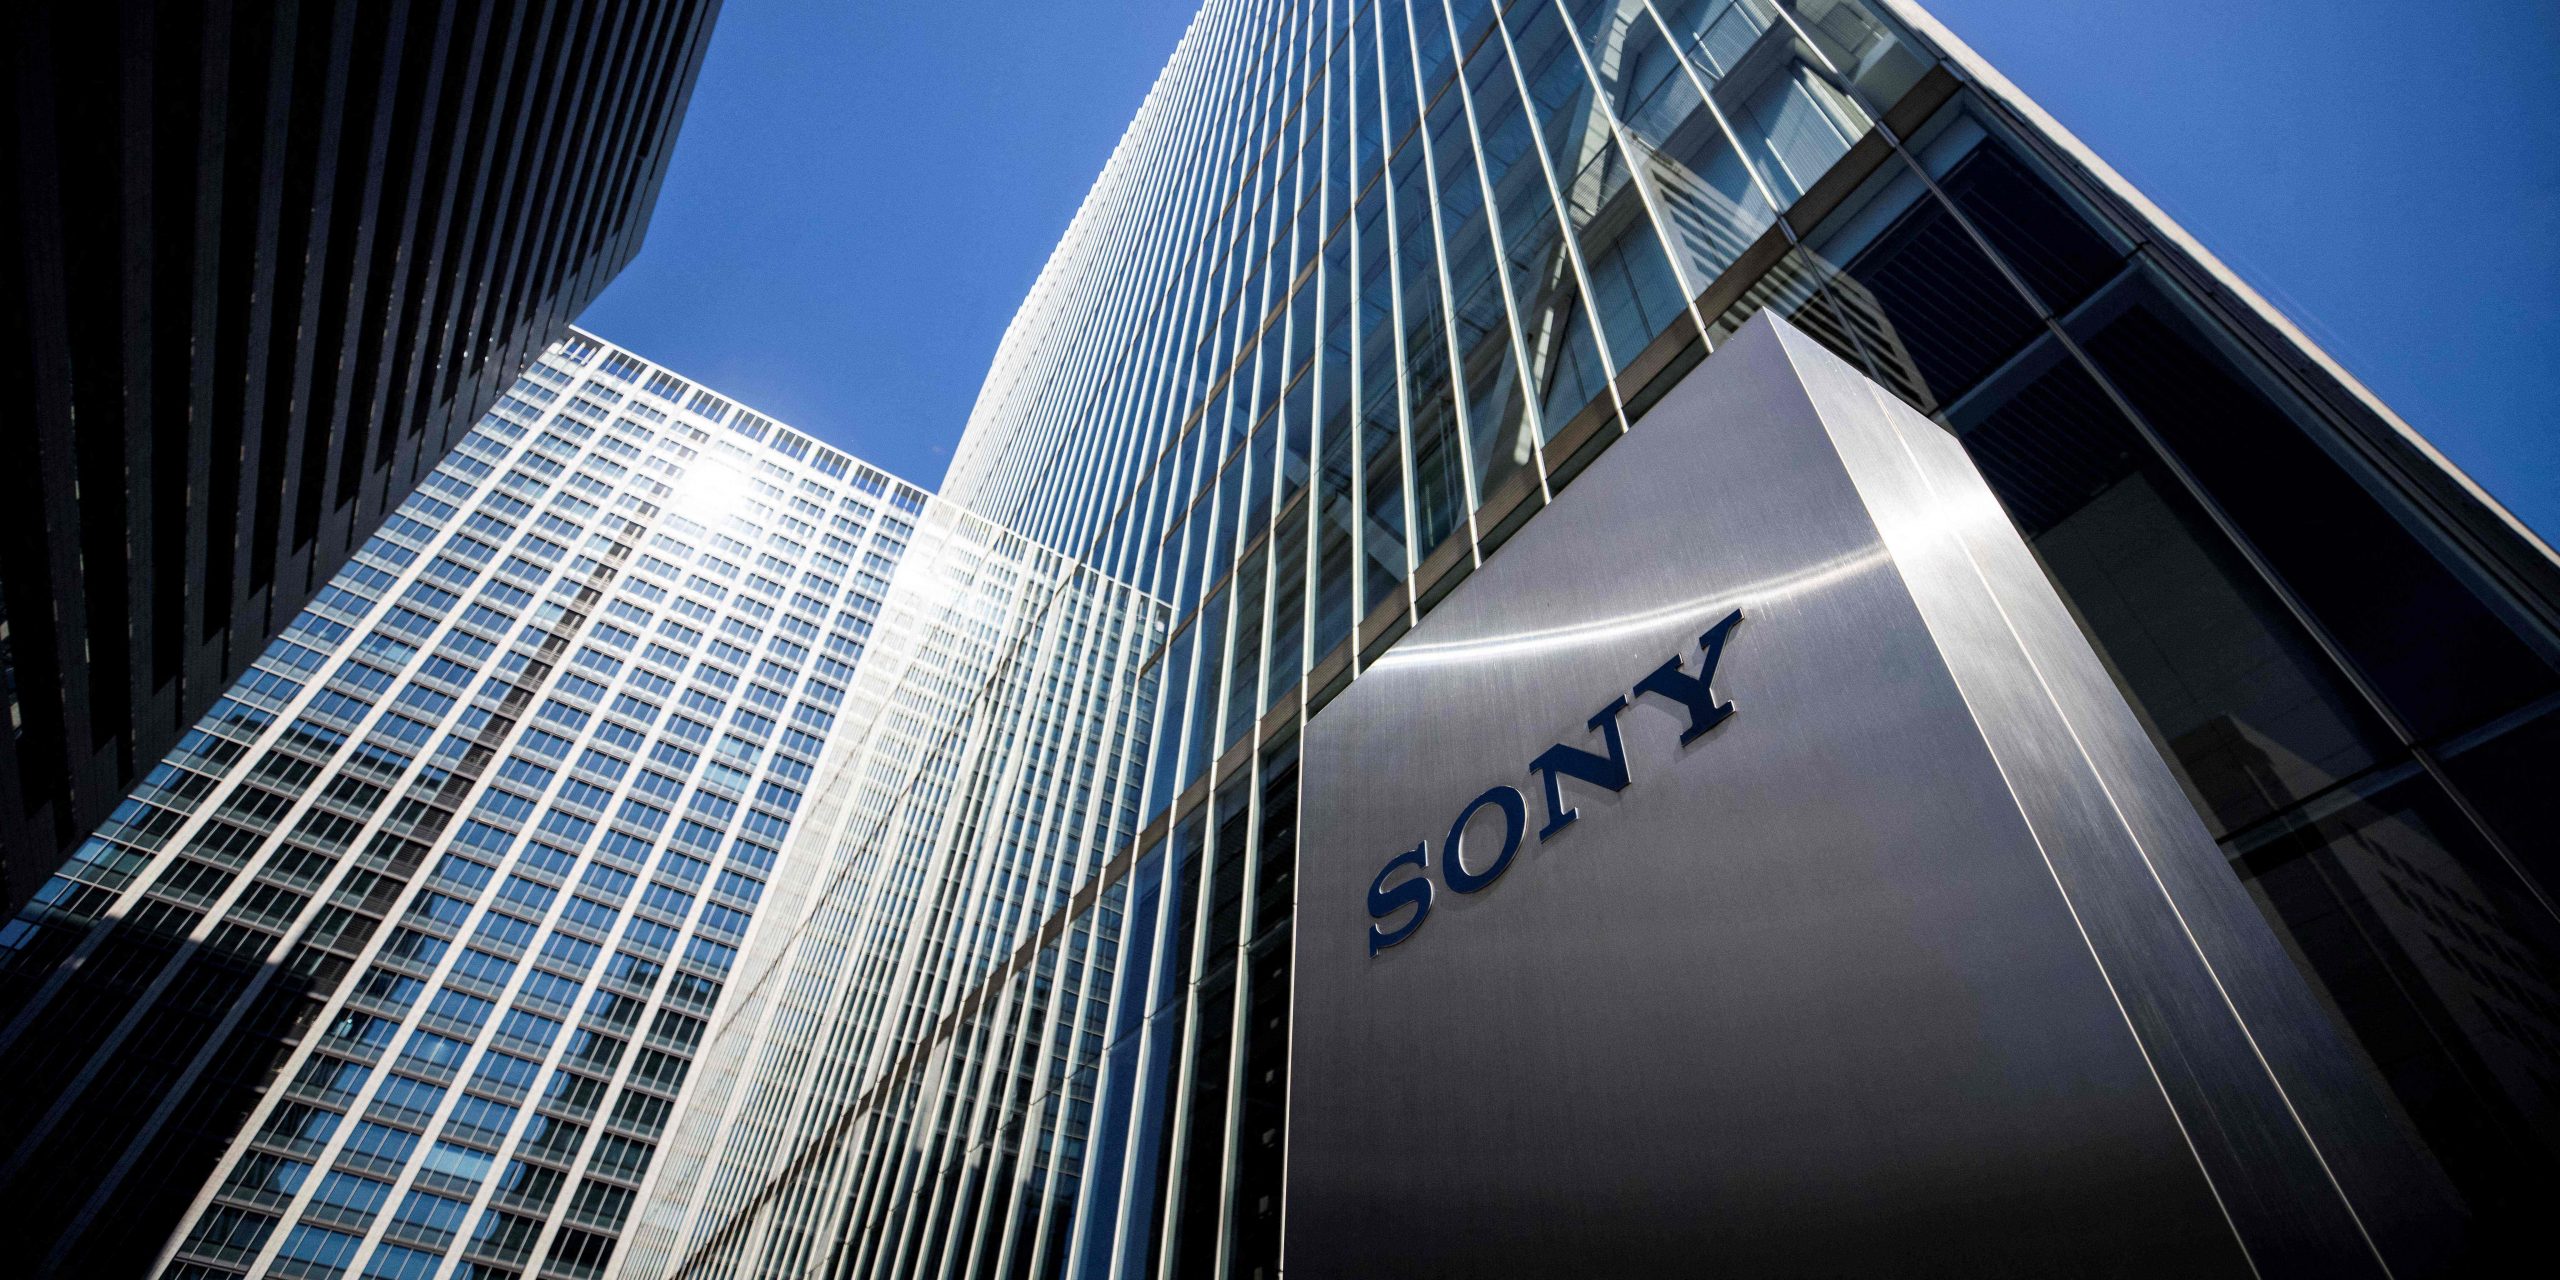 The Sony logo is displayed at an entrance to the company's headquarters in Tokyo on October 28, 2021. (Photo by Behrouz MEHRI / AFP)